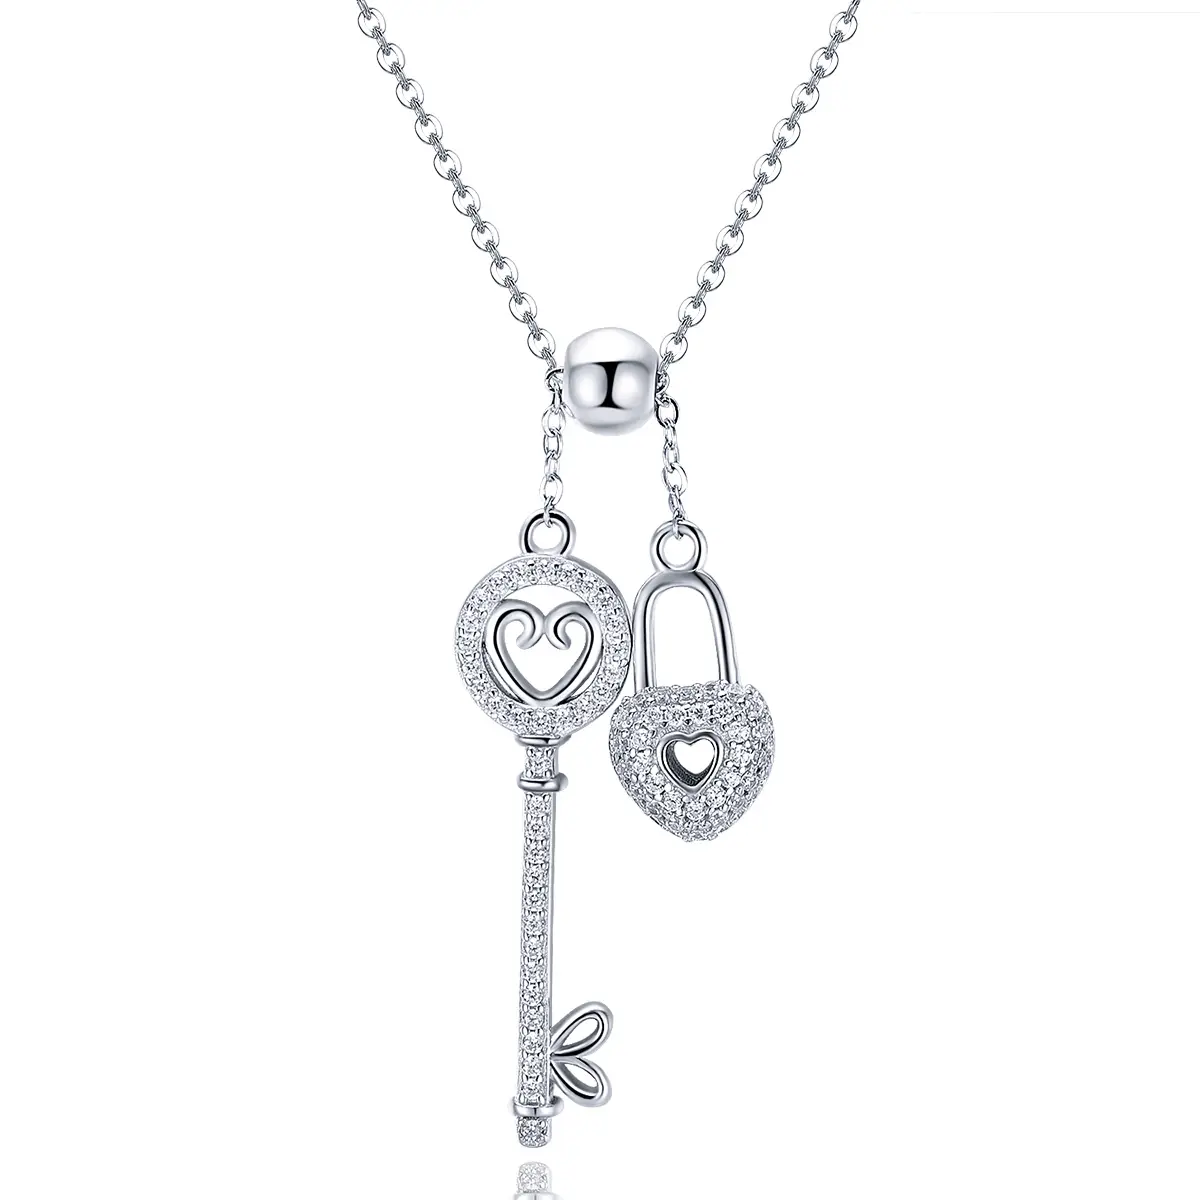 Romantic 925 Sterling Silver Key of Heart Lock Chain Pendant Necklaces for Women Sterling Silver Jewelry Collar SCN290